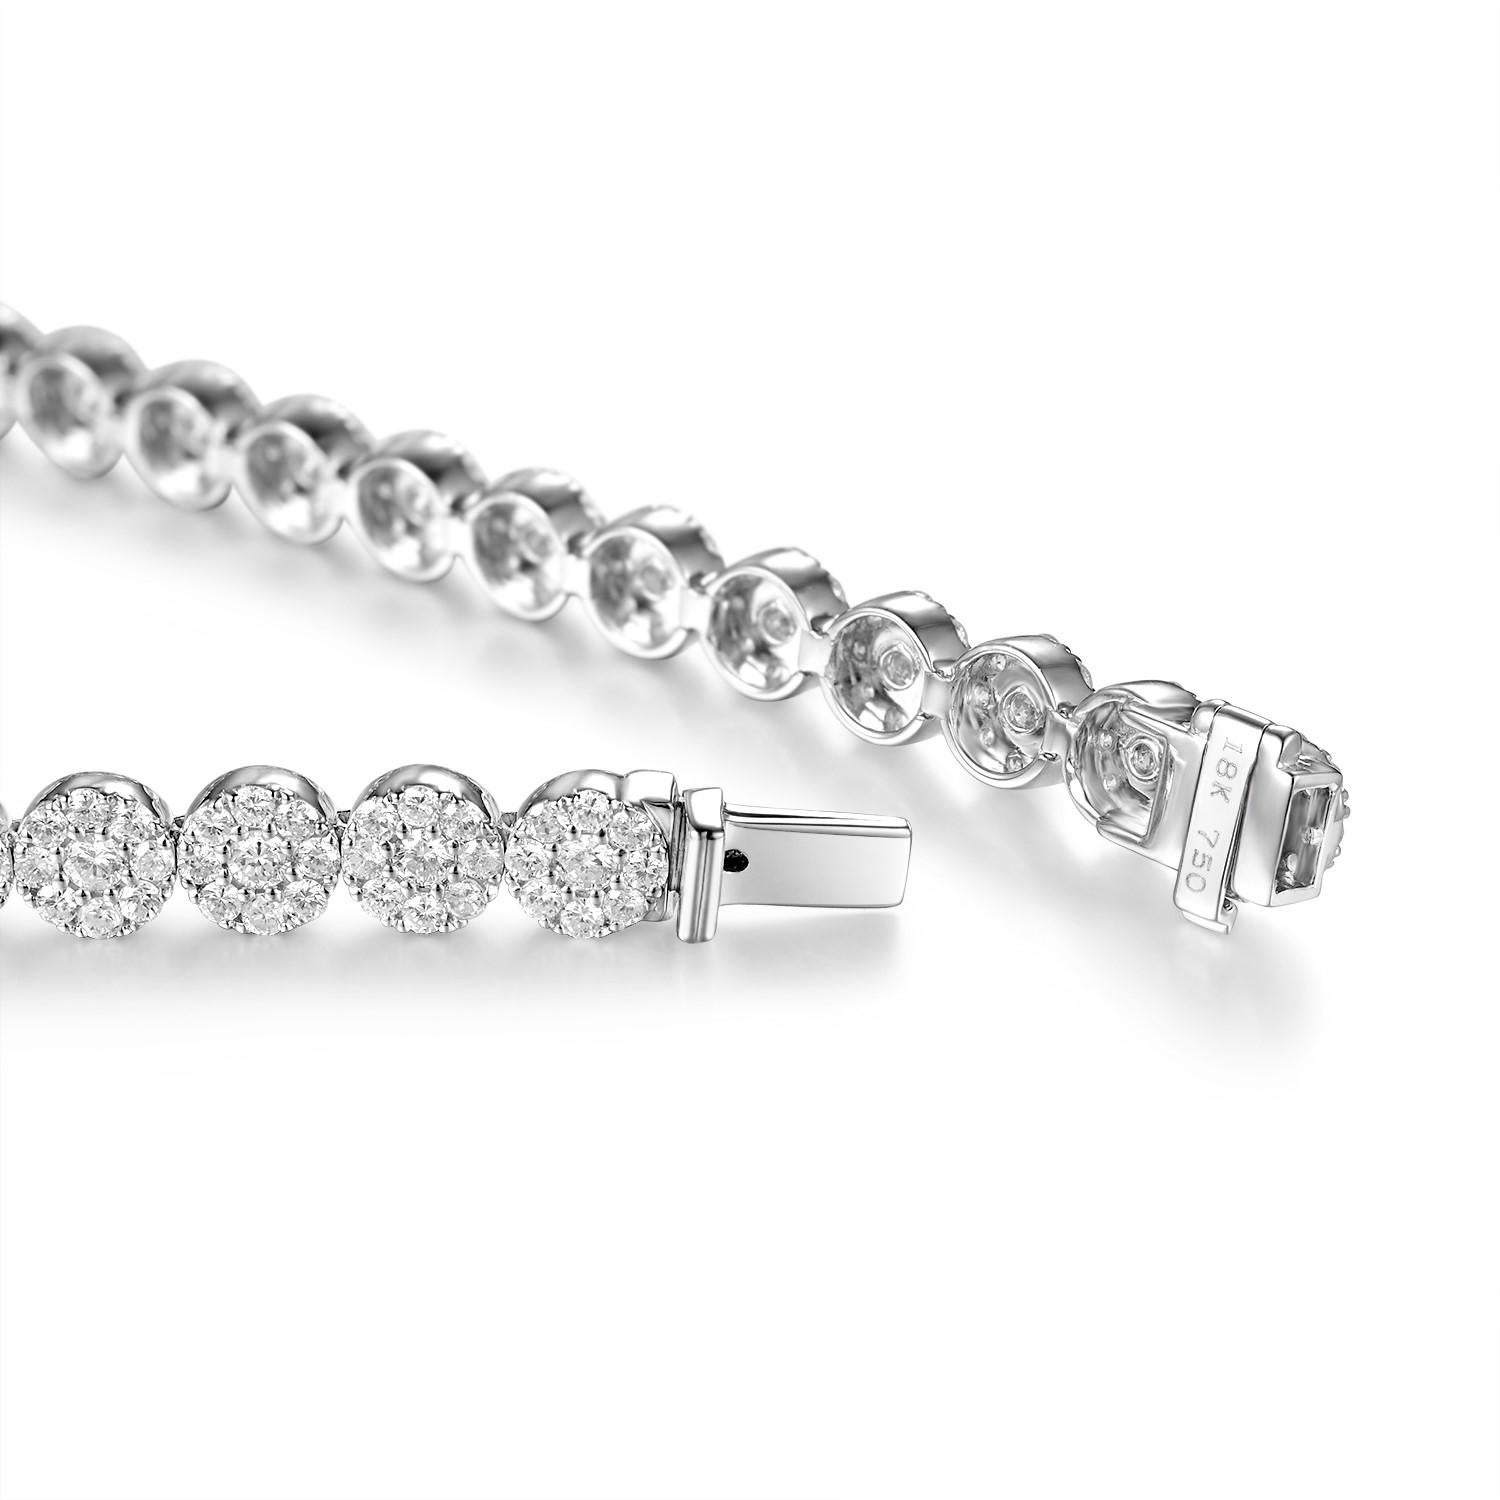 This tennis bracelet feature 4.15 carat of white round diamonds. Each section is set with 1 in 6 cluster diamonds. The color of the diamonds are F-G color and SI clarity. 

Length 18cm
Complimentary length adjustment 